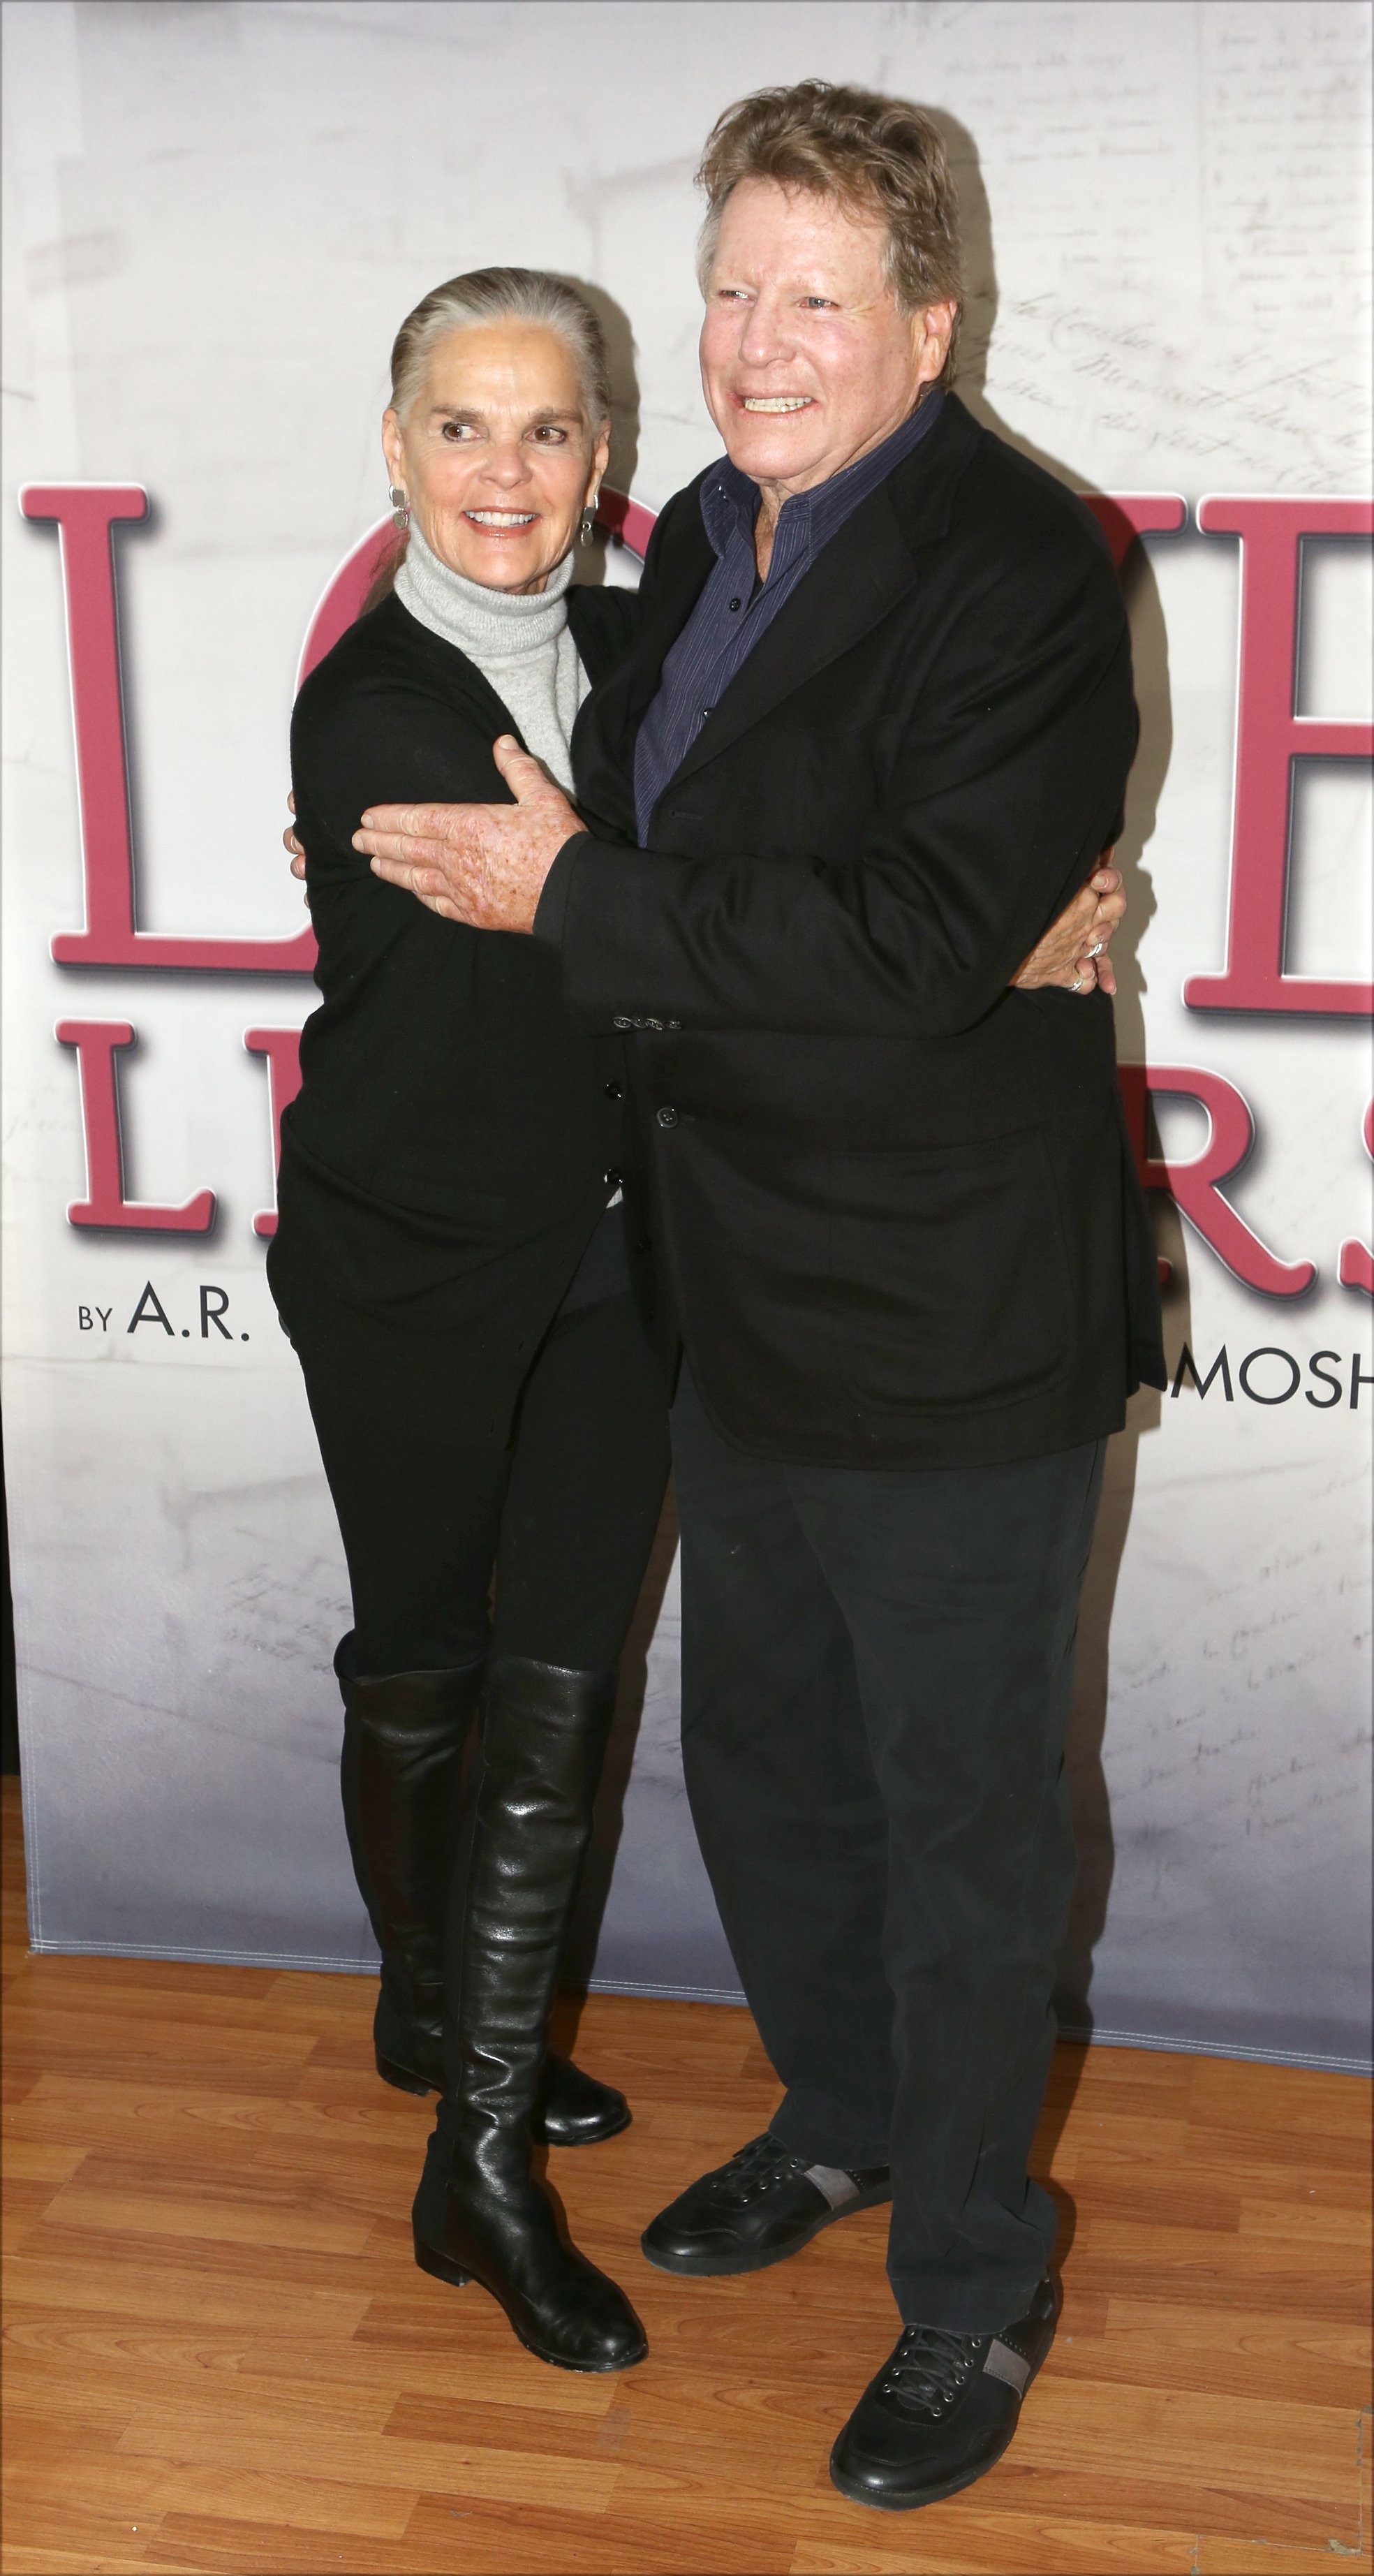 Ali MacGraw and Ryan O'Neal attend a photo call for their upcoming touring production of 'Love Letters' at The Shelter Studios Penthouse on February 24, 2015 in New York City | Photo: Getty Images